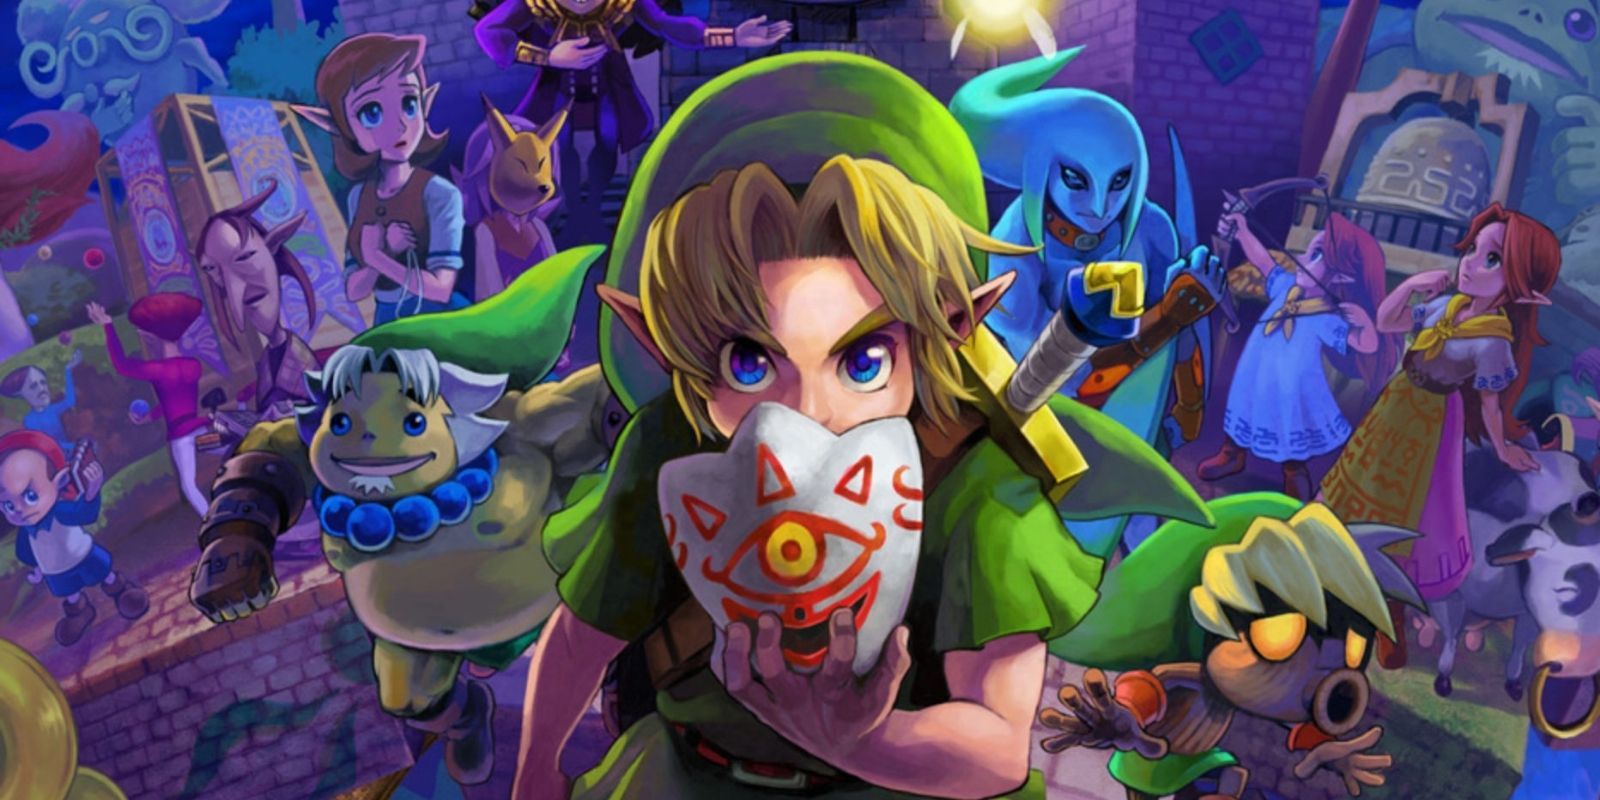 The key art for The Legend of Zelda: Majora's Mask With Young Link Holding A Mask Along With His Goron And Deku Transformations Next To Him